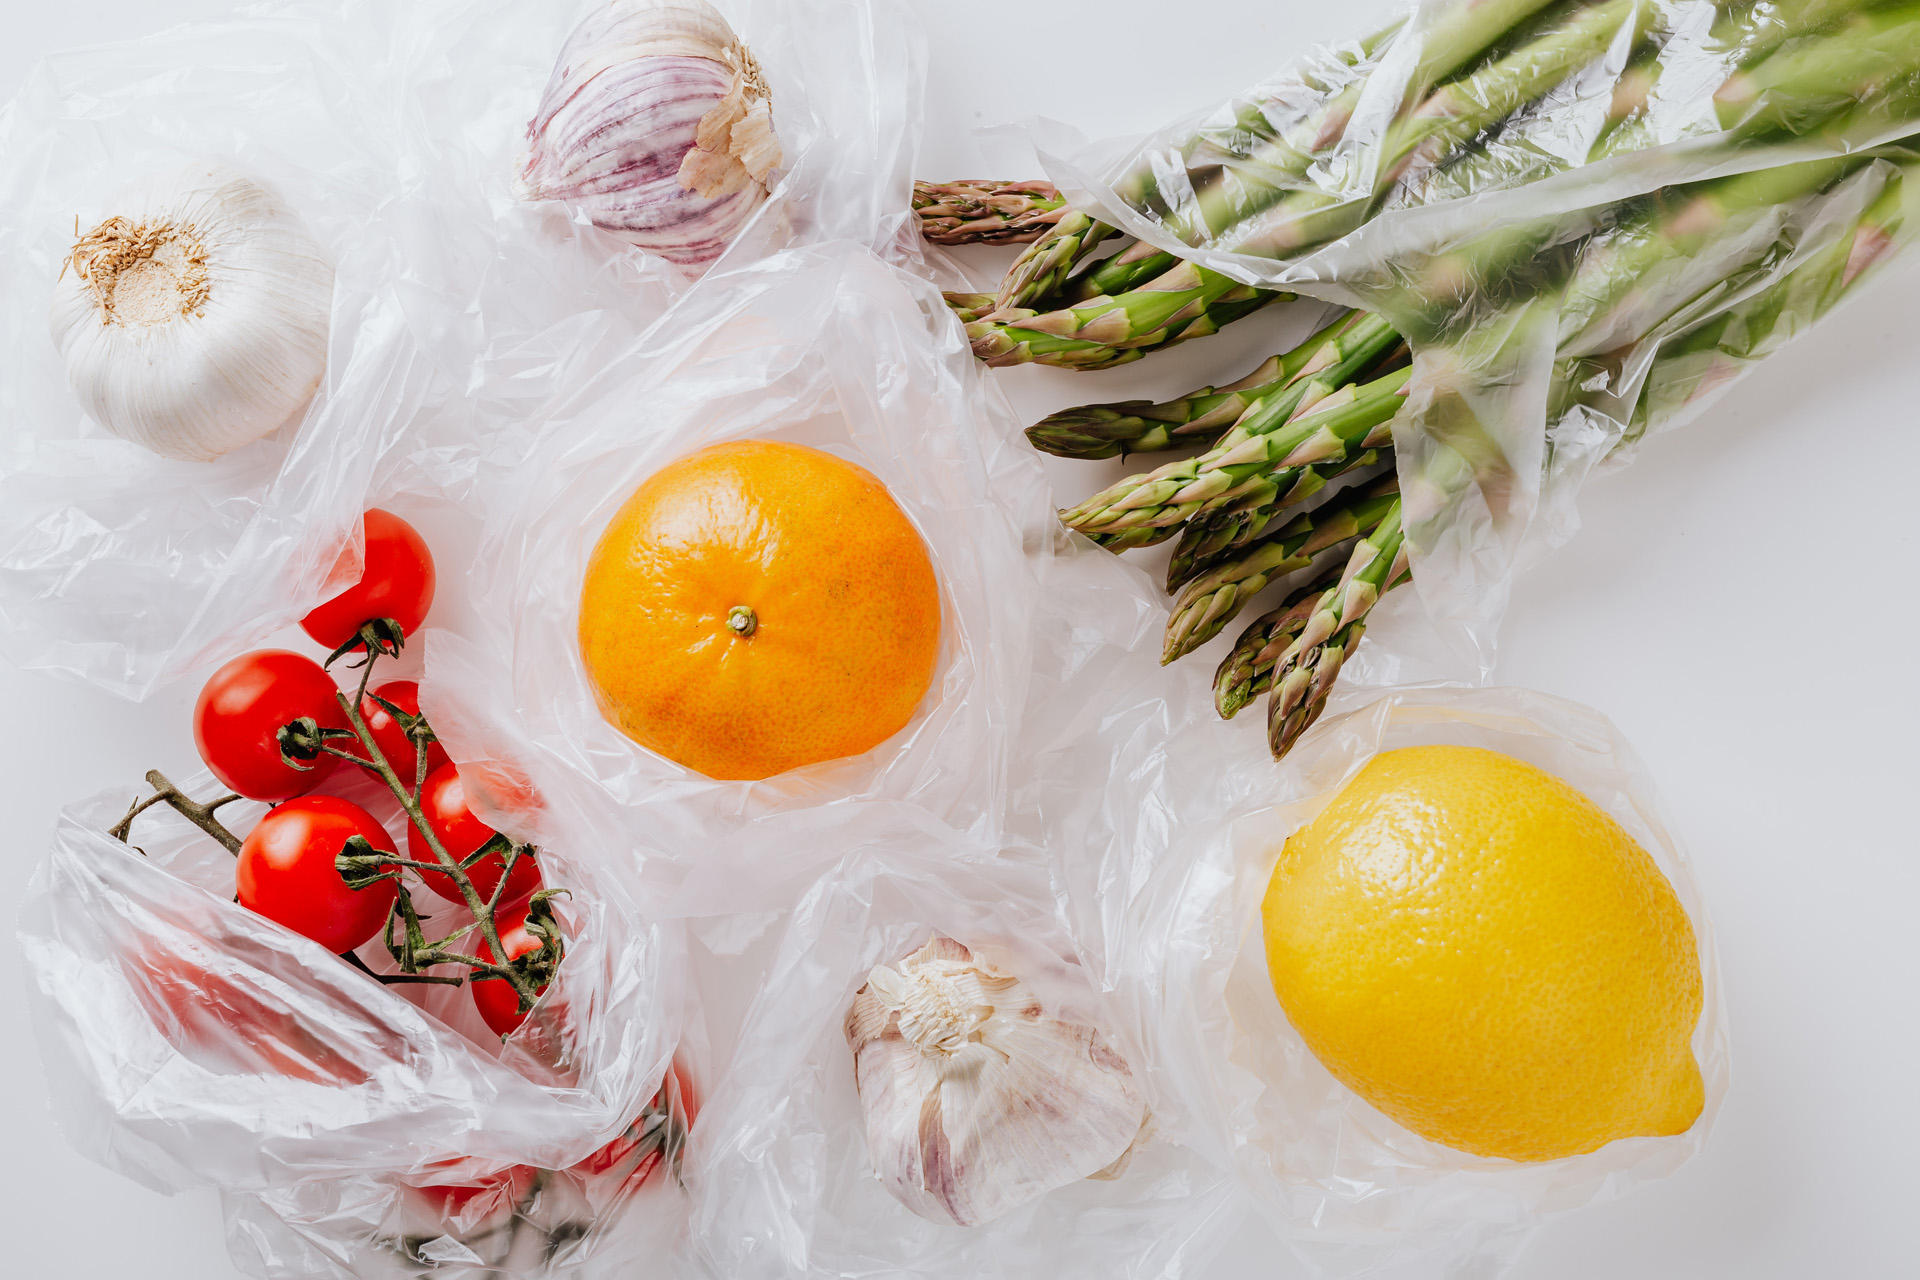 Fruits and vegetables in thin plastic bags